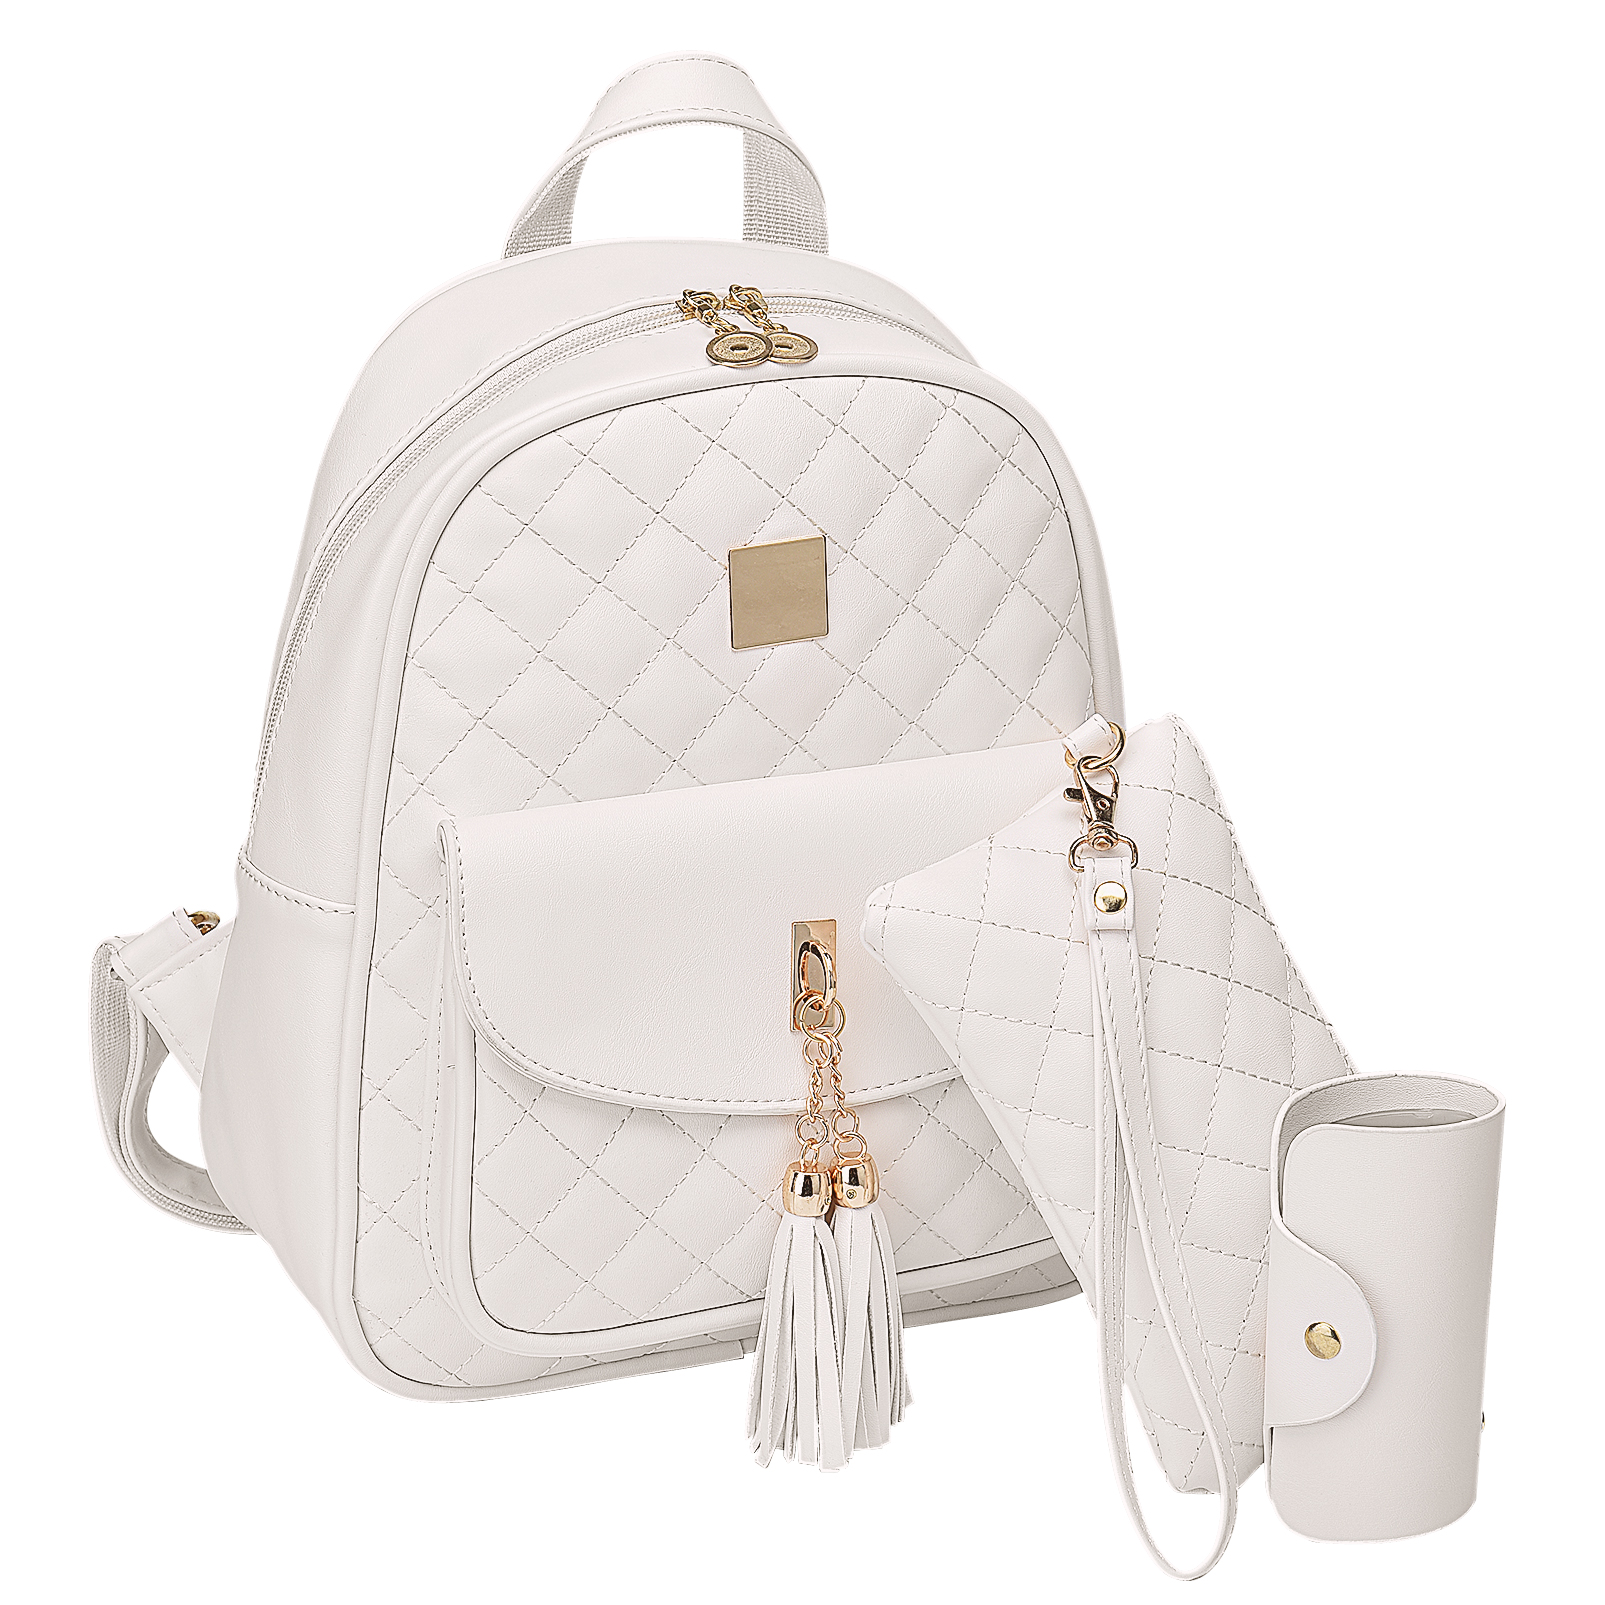 Vbiger 3-in-1 Women Mini Backpack, Leather Small Backpack Purse for Teen Girl, Travel Backpack Cute Schoolbags- White - image 1 of 7